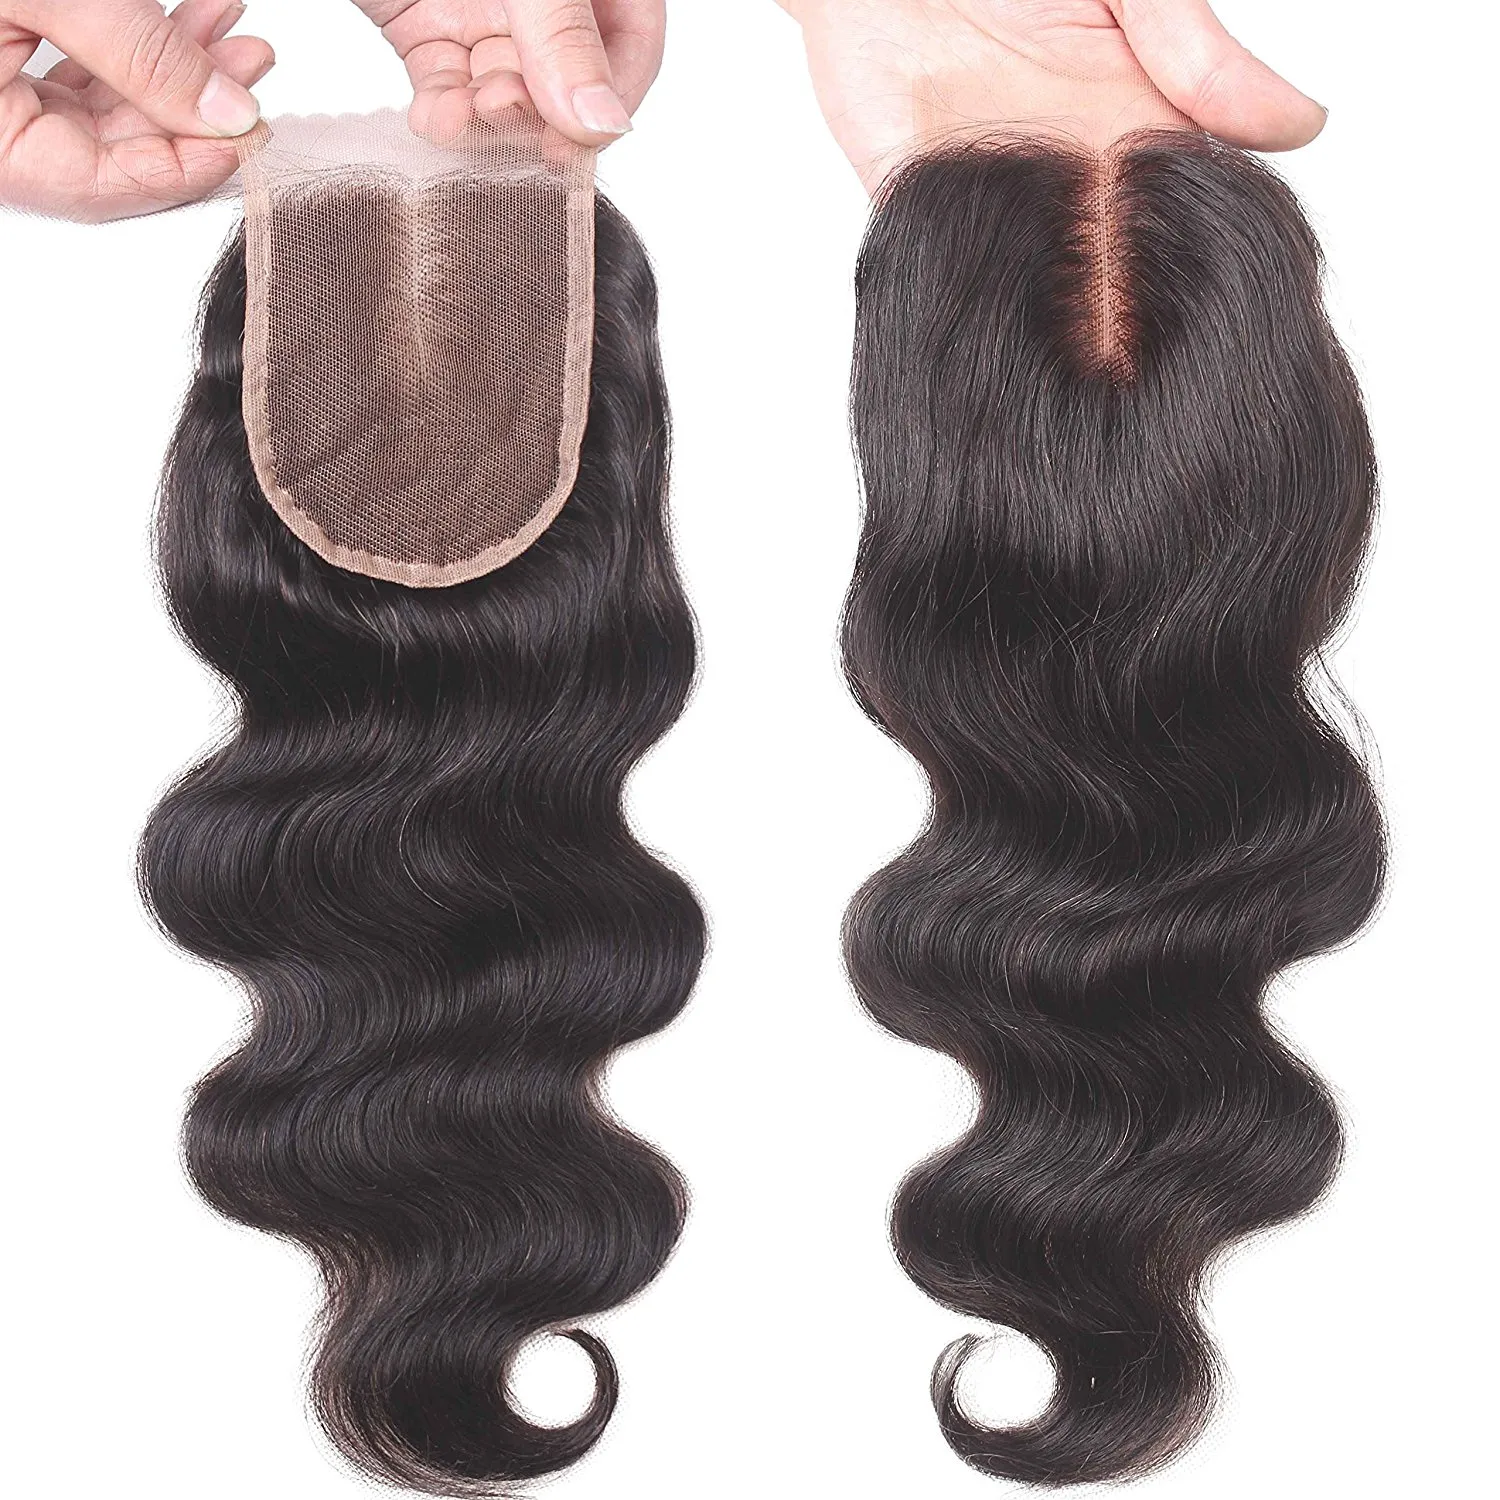 4x4 Lace Closure Malaysian Body Wave Human Hair Closure Free Middle 3 Part Lace Closure Bleached Knots Human Hair Products